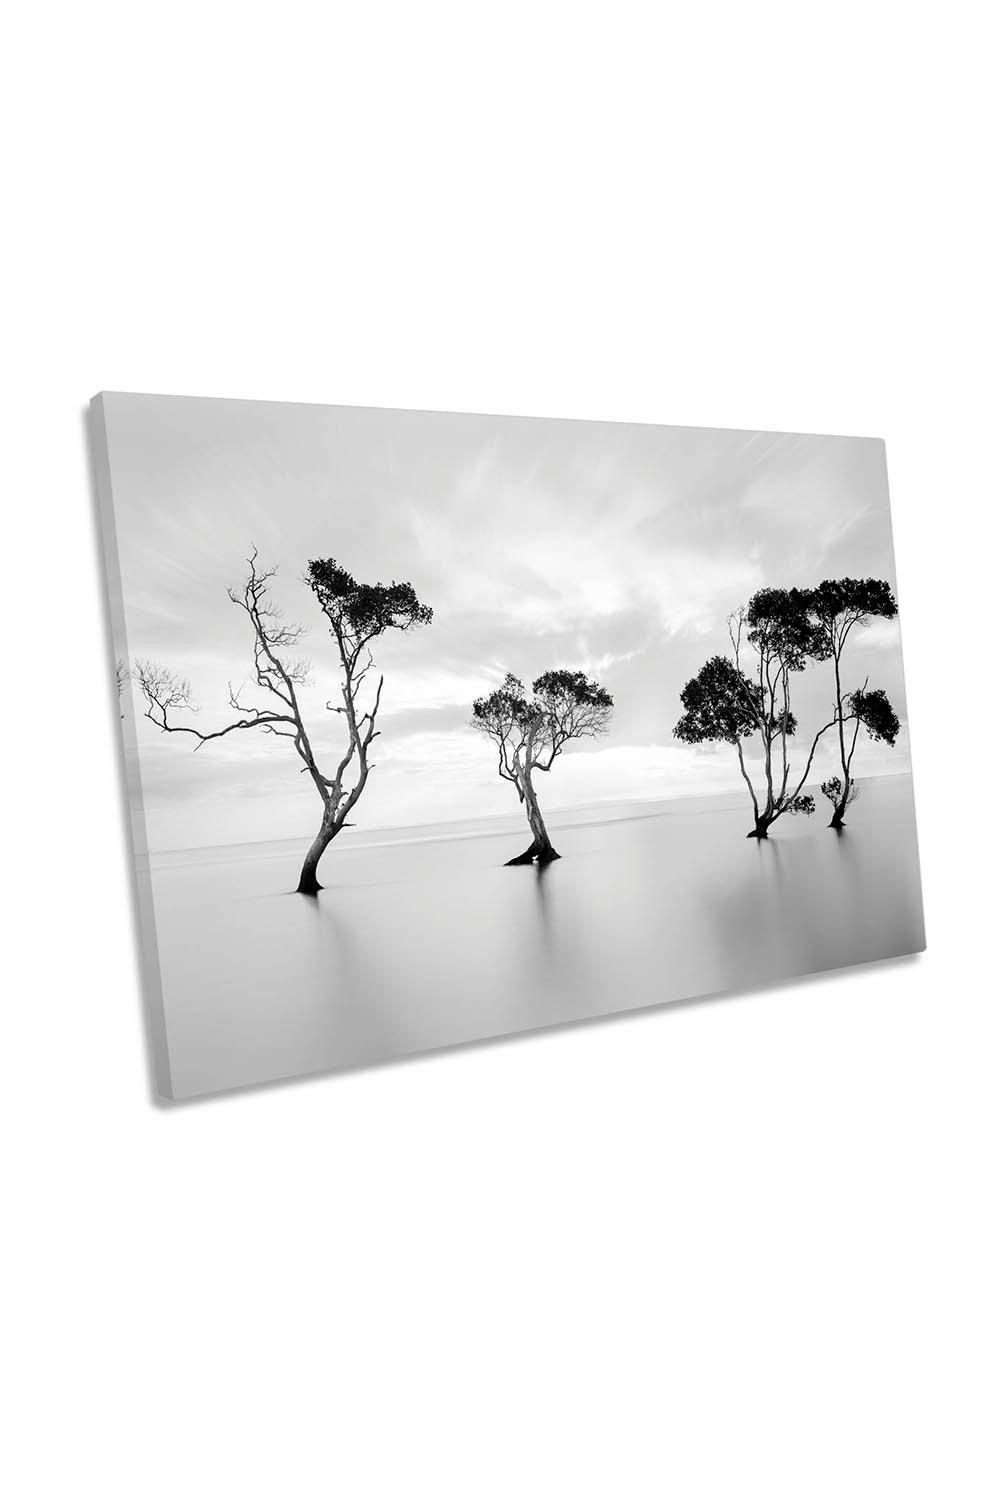 Drowning Not Waving Calm Lake Canvas Wall Art Picture Print